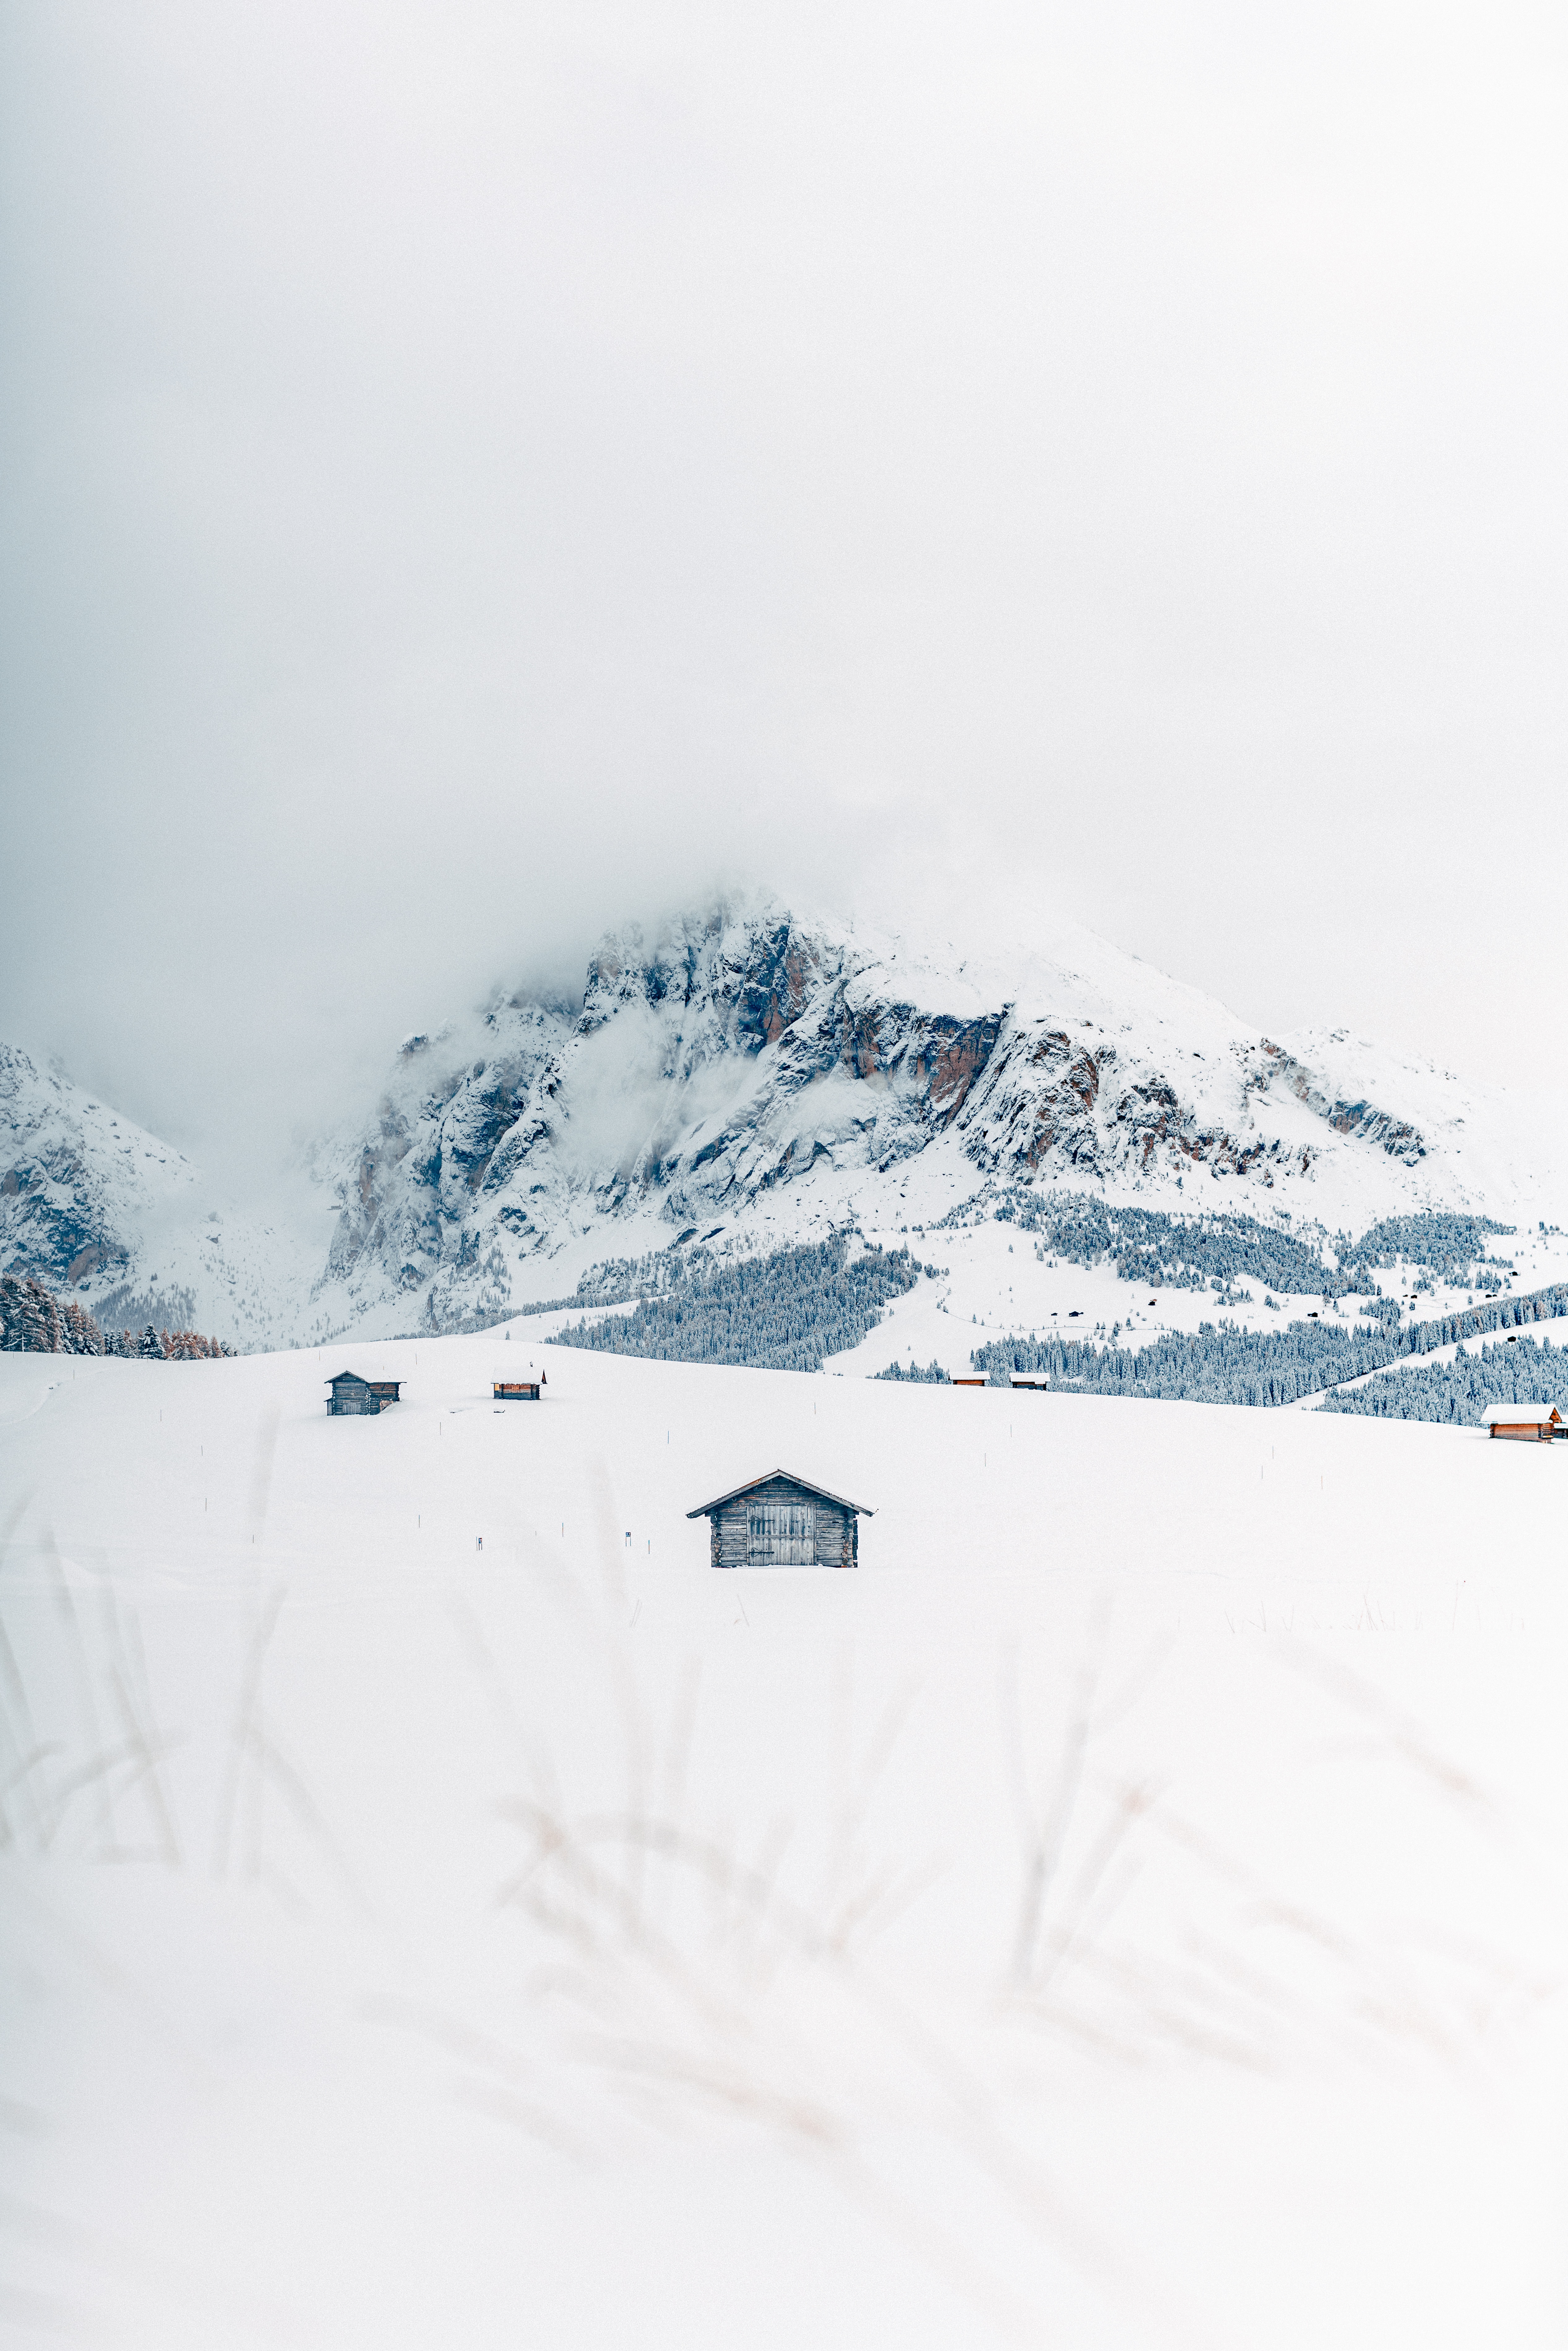 Full HD Wallpaper landscape, winter, nature, houses, mountains, snow, small houses